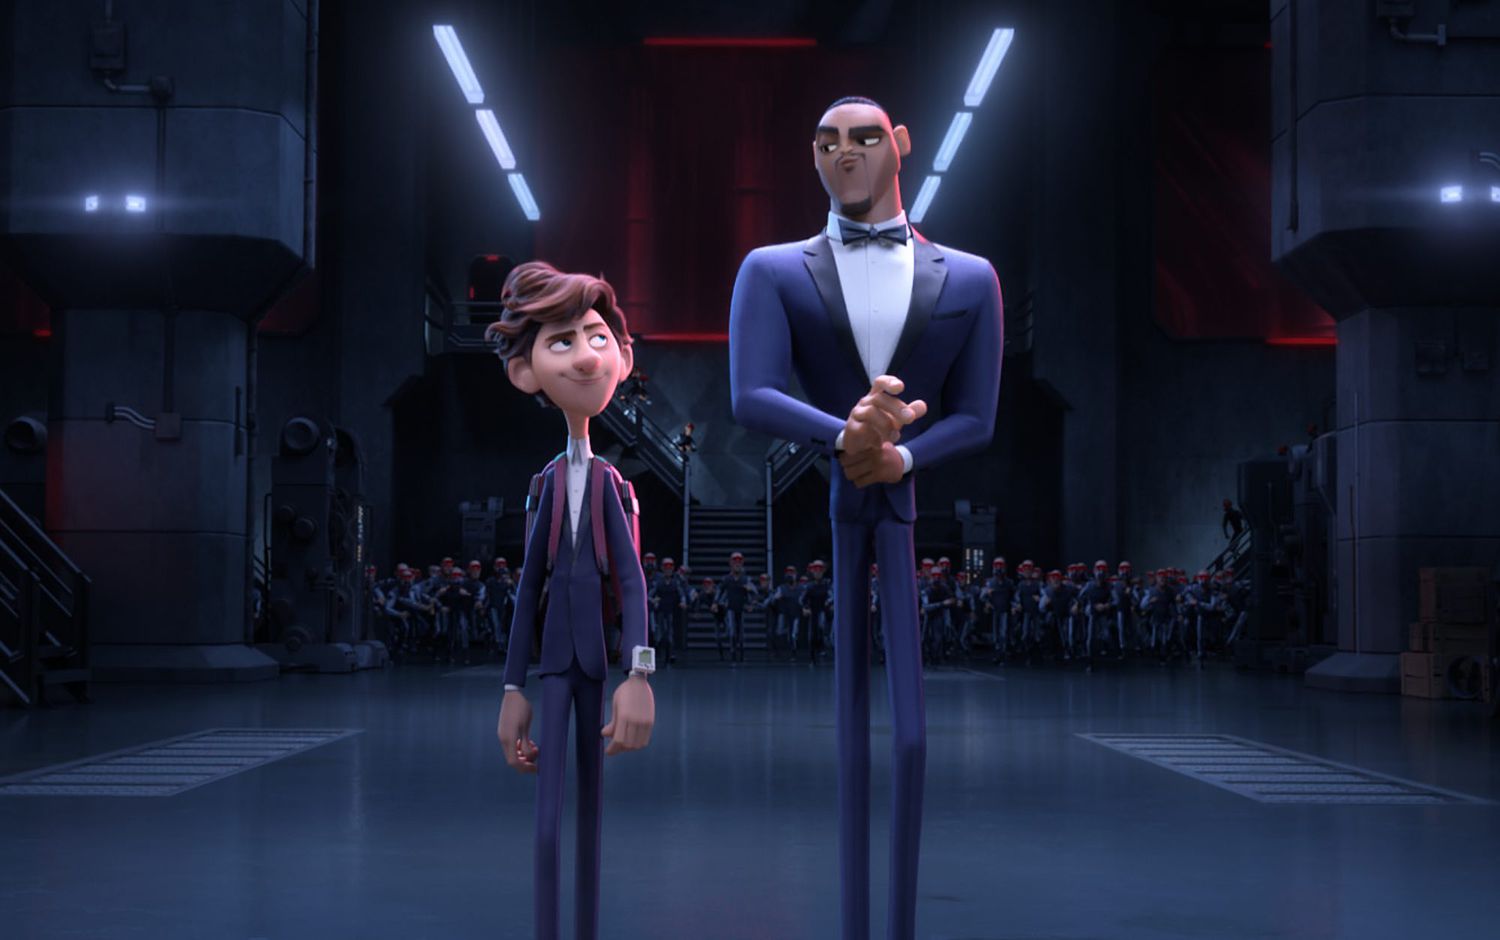 16. Spies in Disguise (2019)